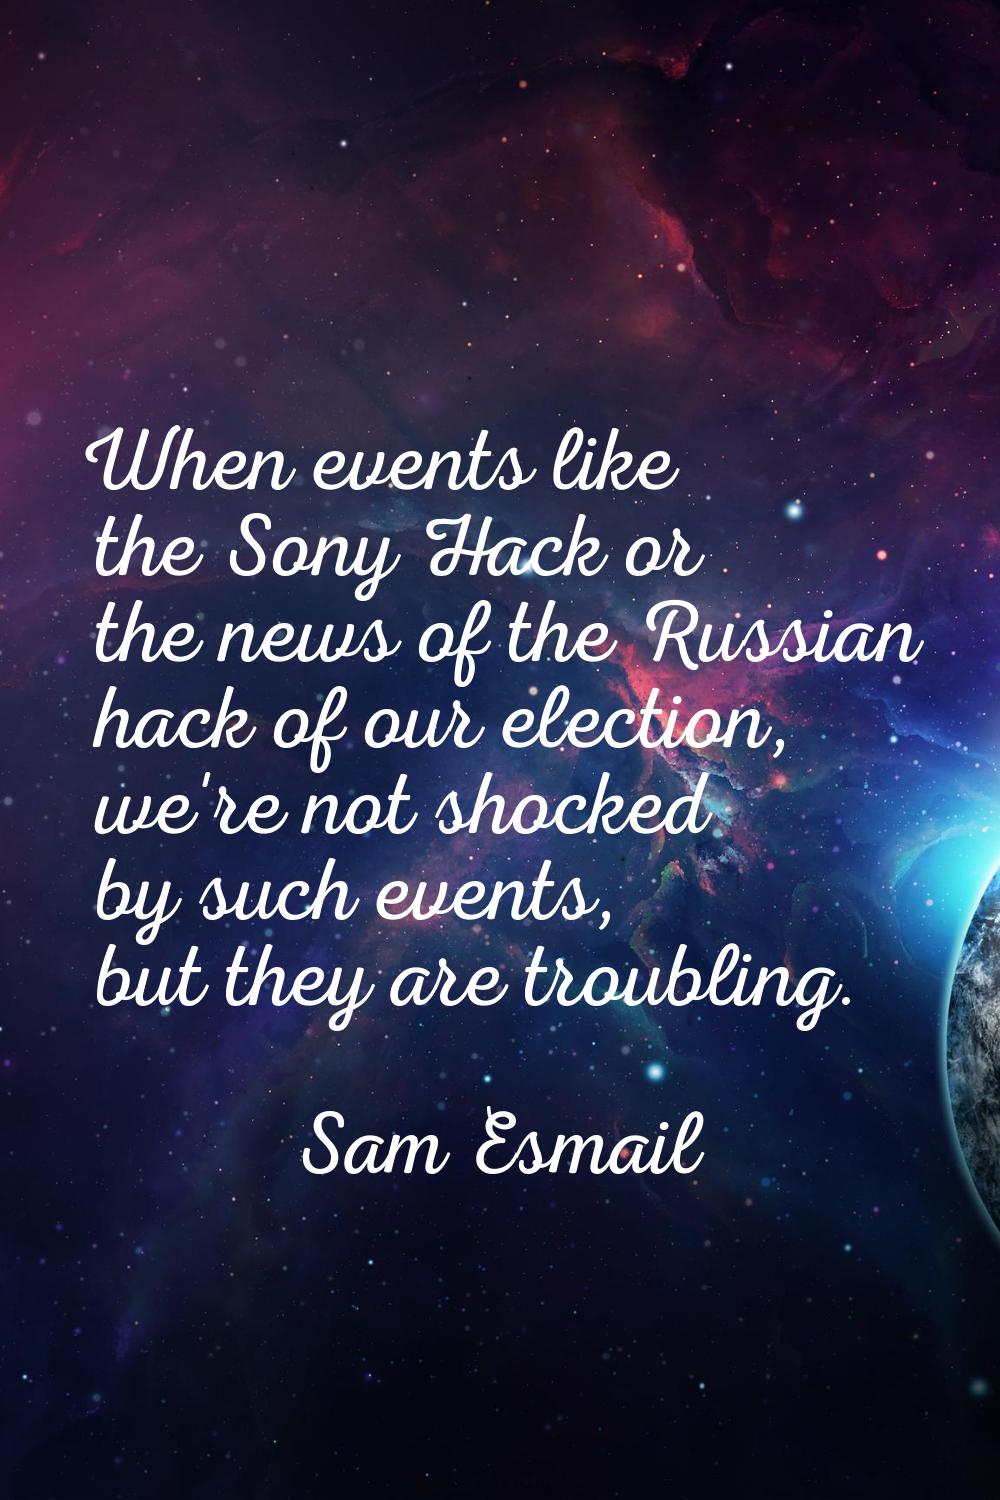 When events like the Sony Hack or the news of the Russian hack of our election, we're not shocked b